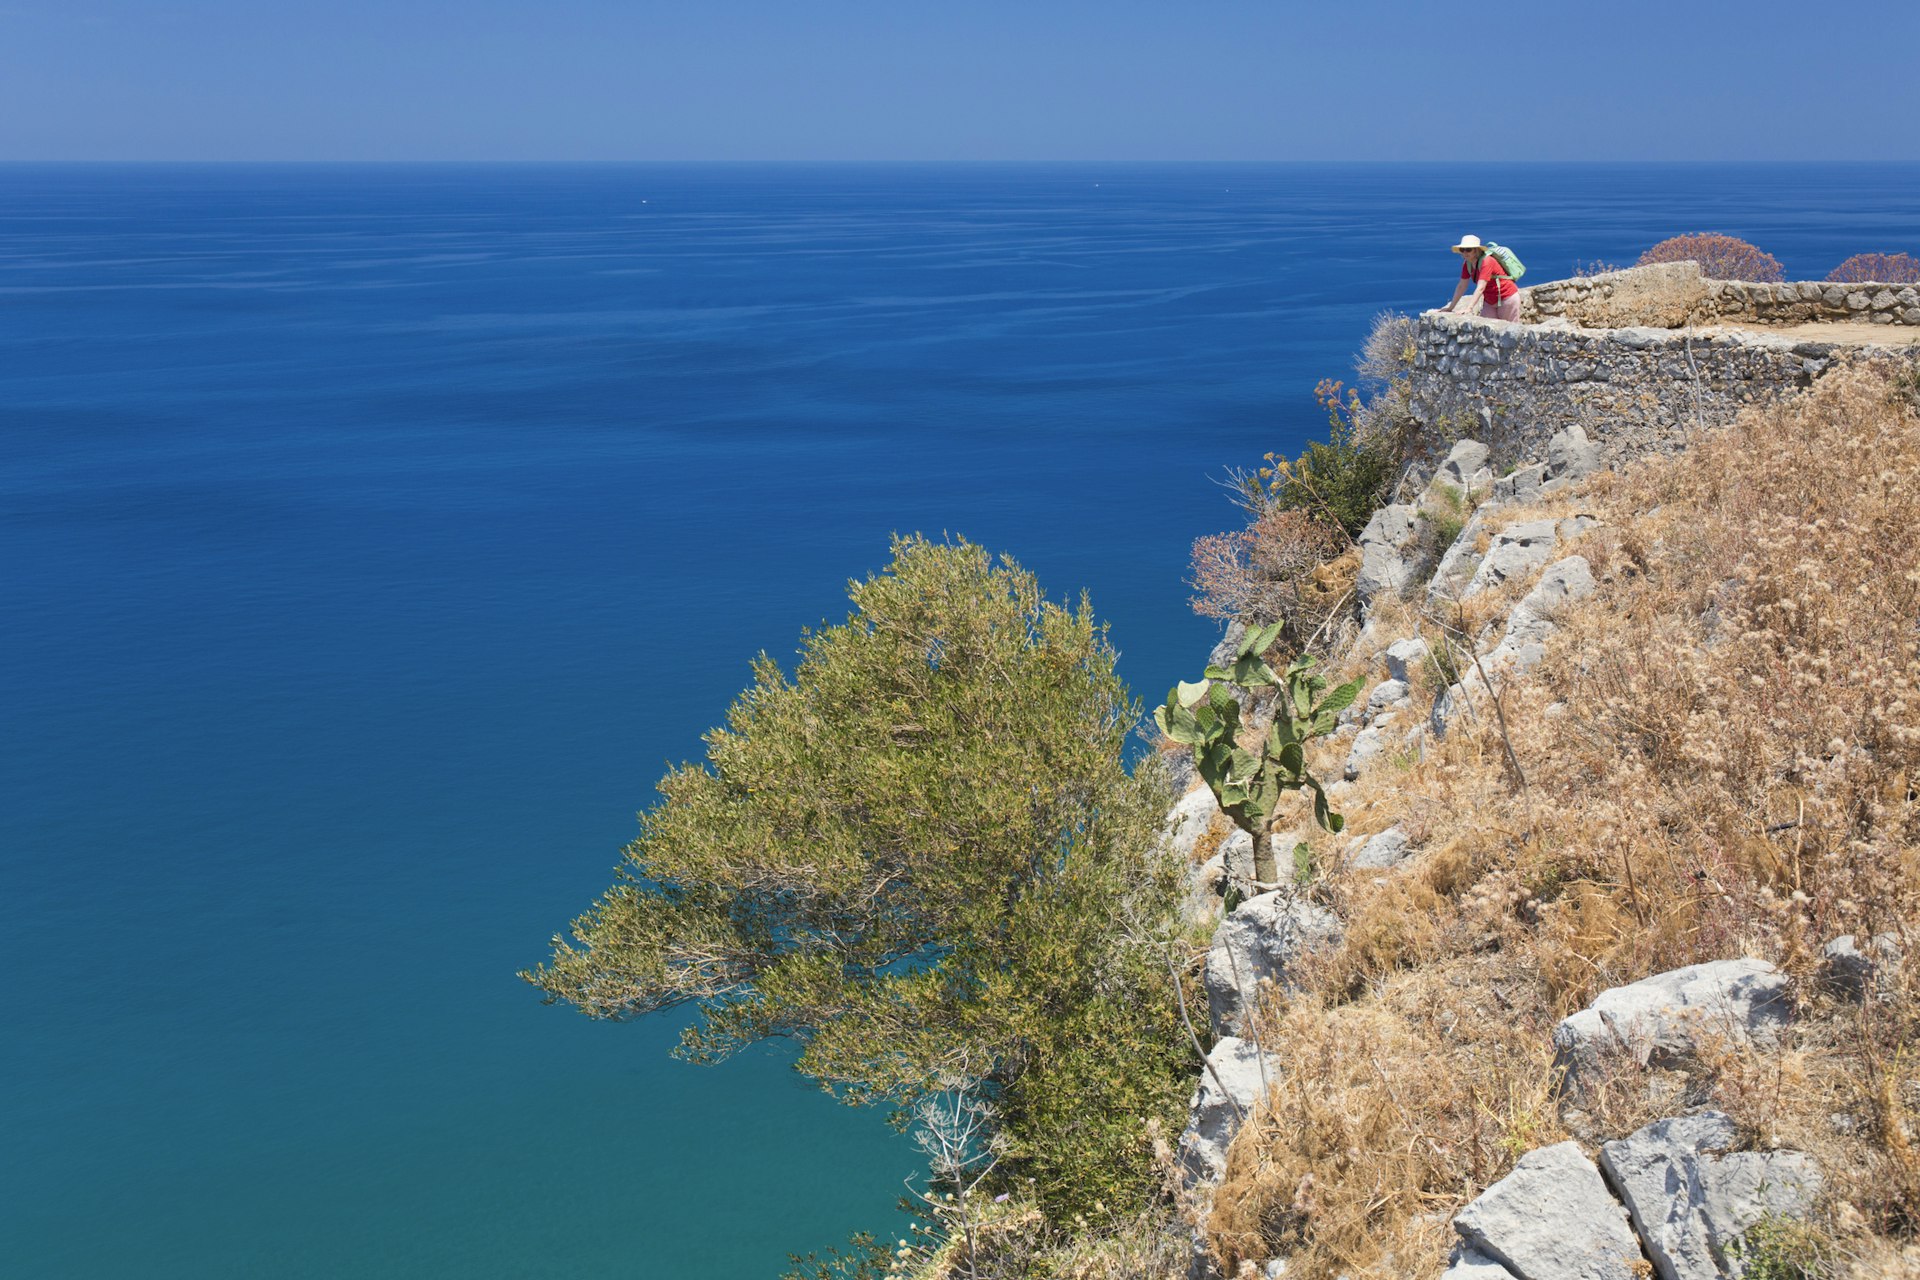 A hiker stands at an ancient stone wall at the top of a cliff admiring the views out to sea